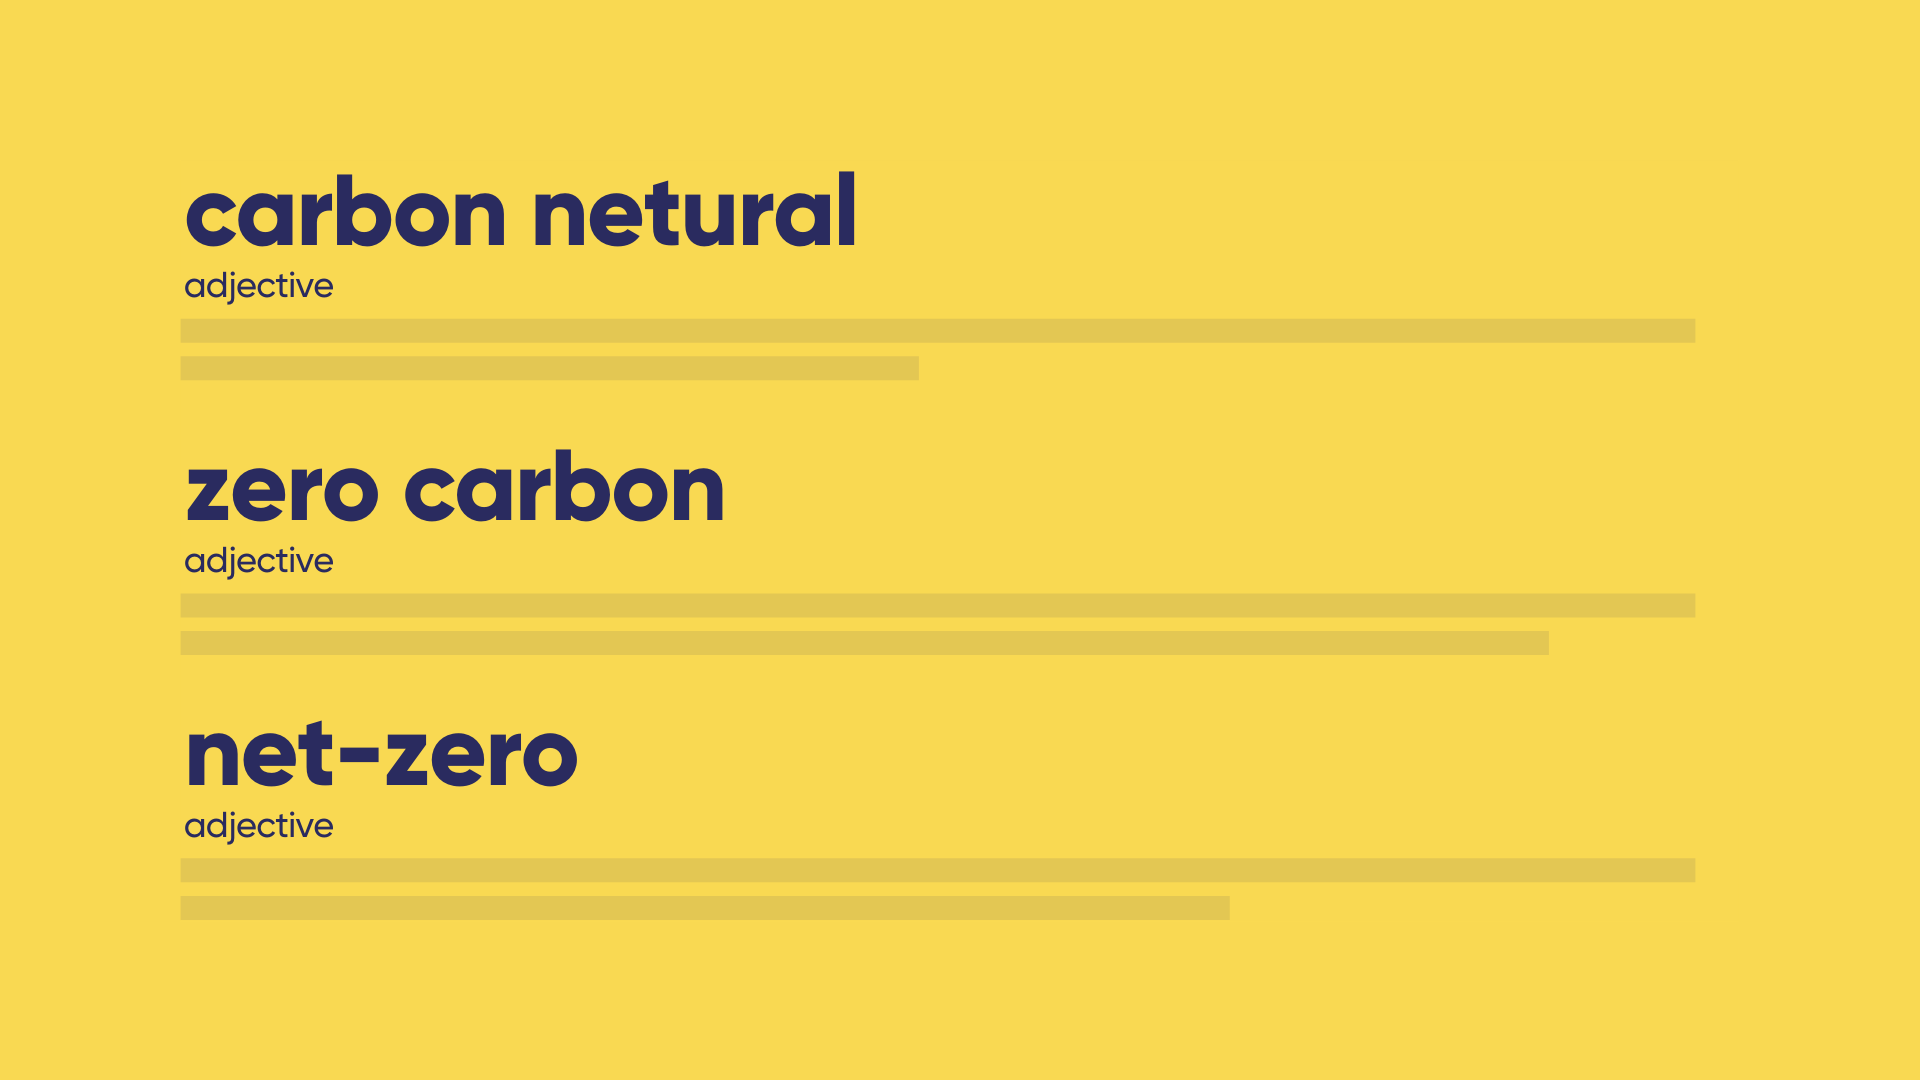 what's the difference between carbon neutral zero carbon and net-zero?